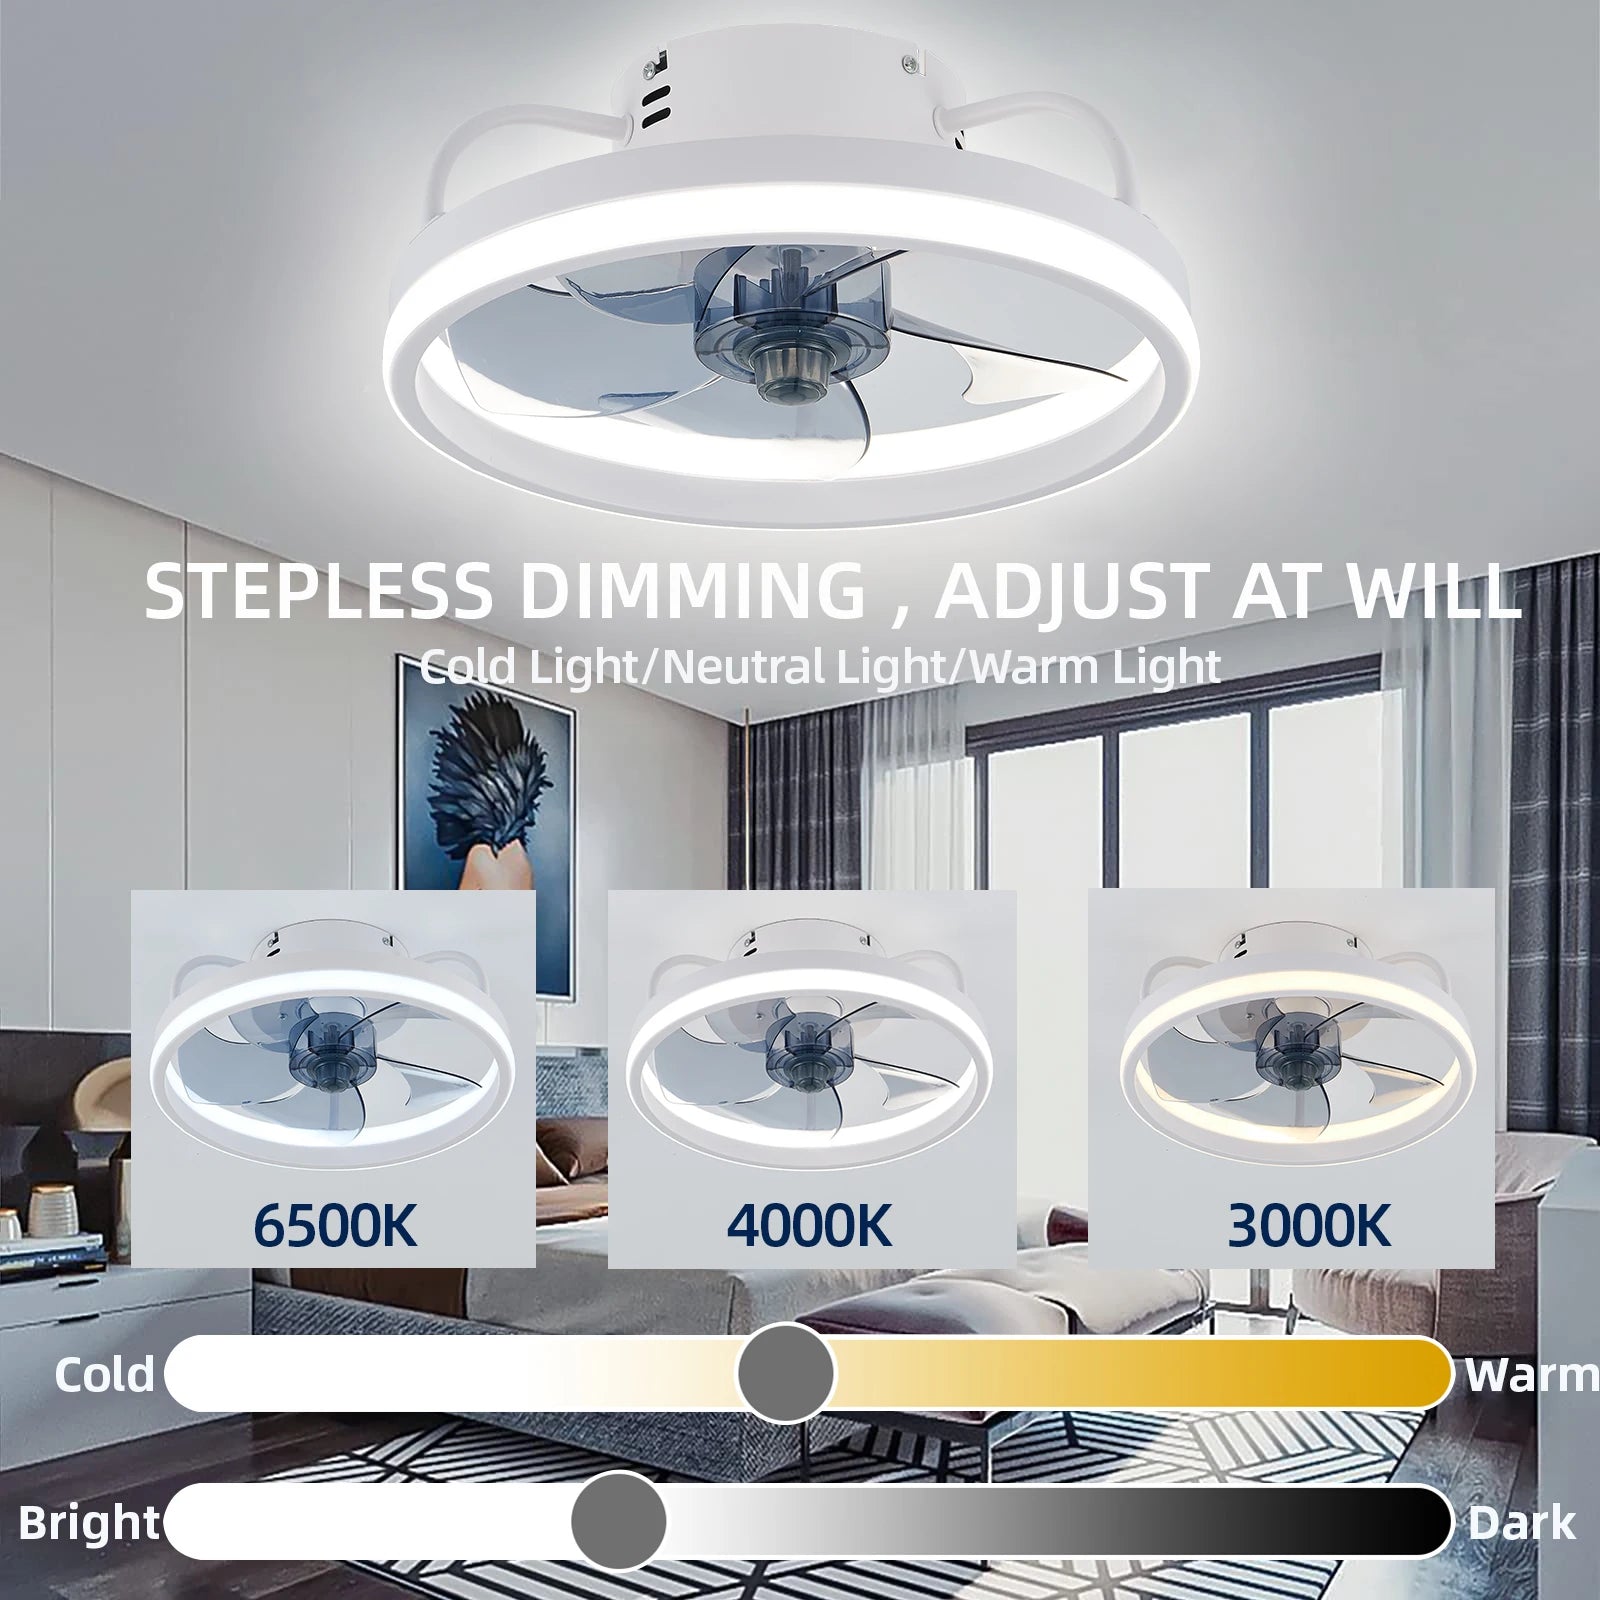 Cloud Discoveries Smart Ceiling Fan - Enhance your bedroom decor with lights, remote control, and invisible blades for silent operation.